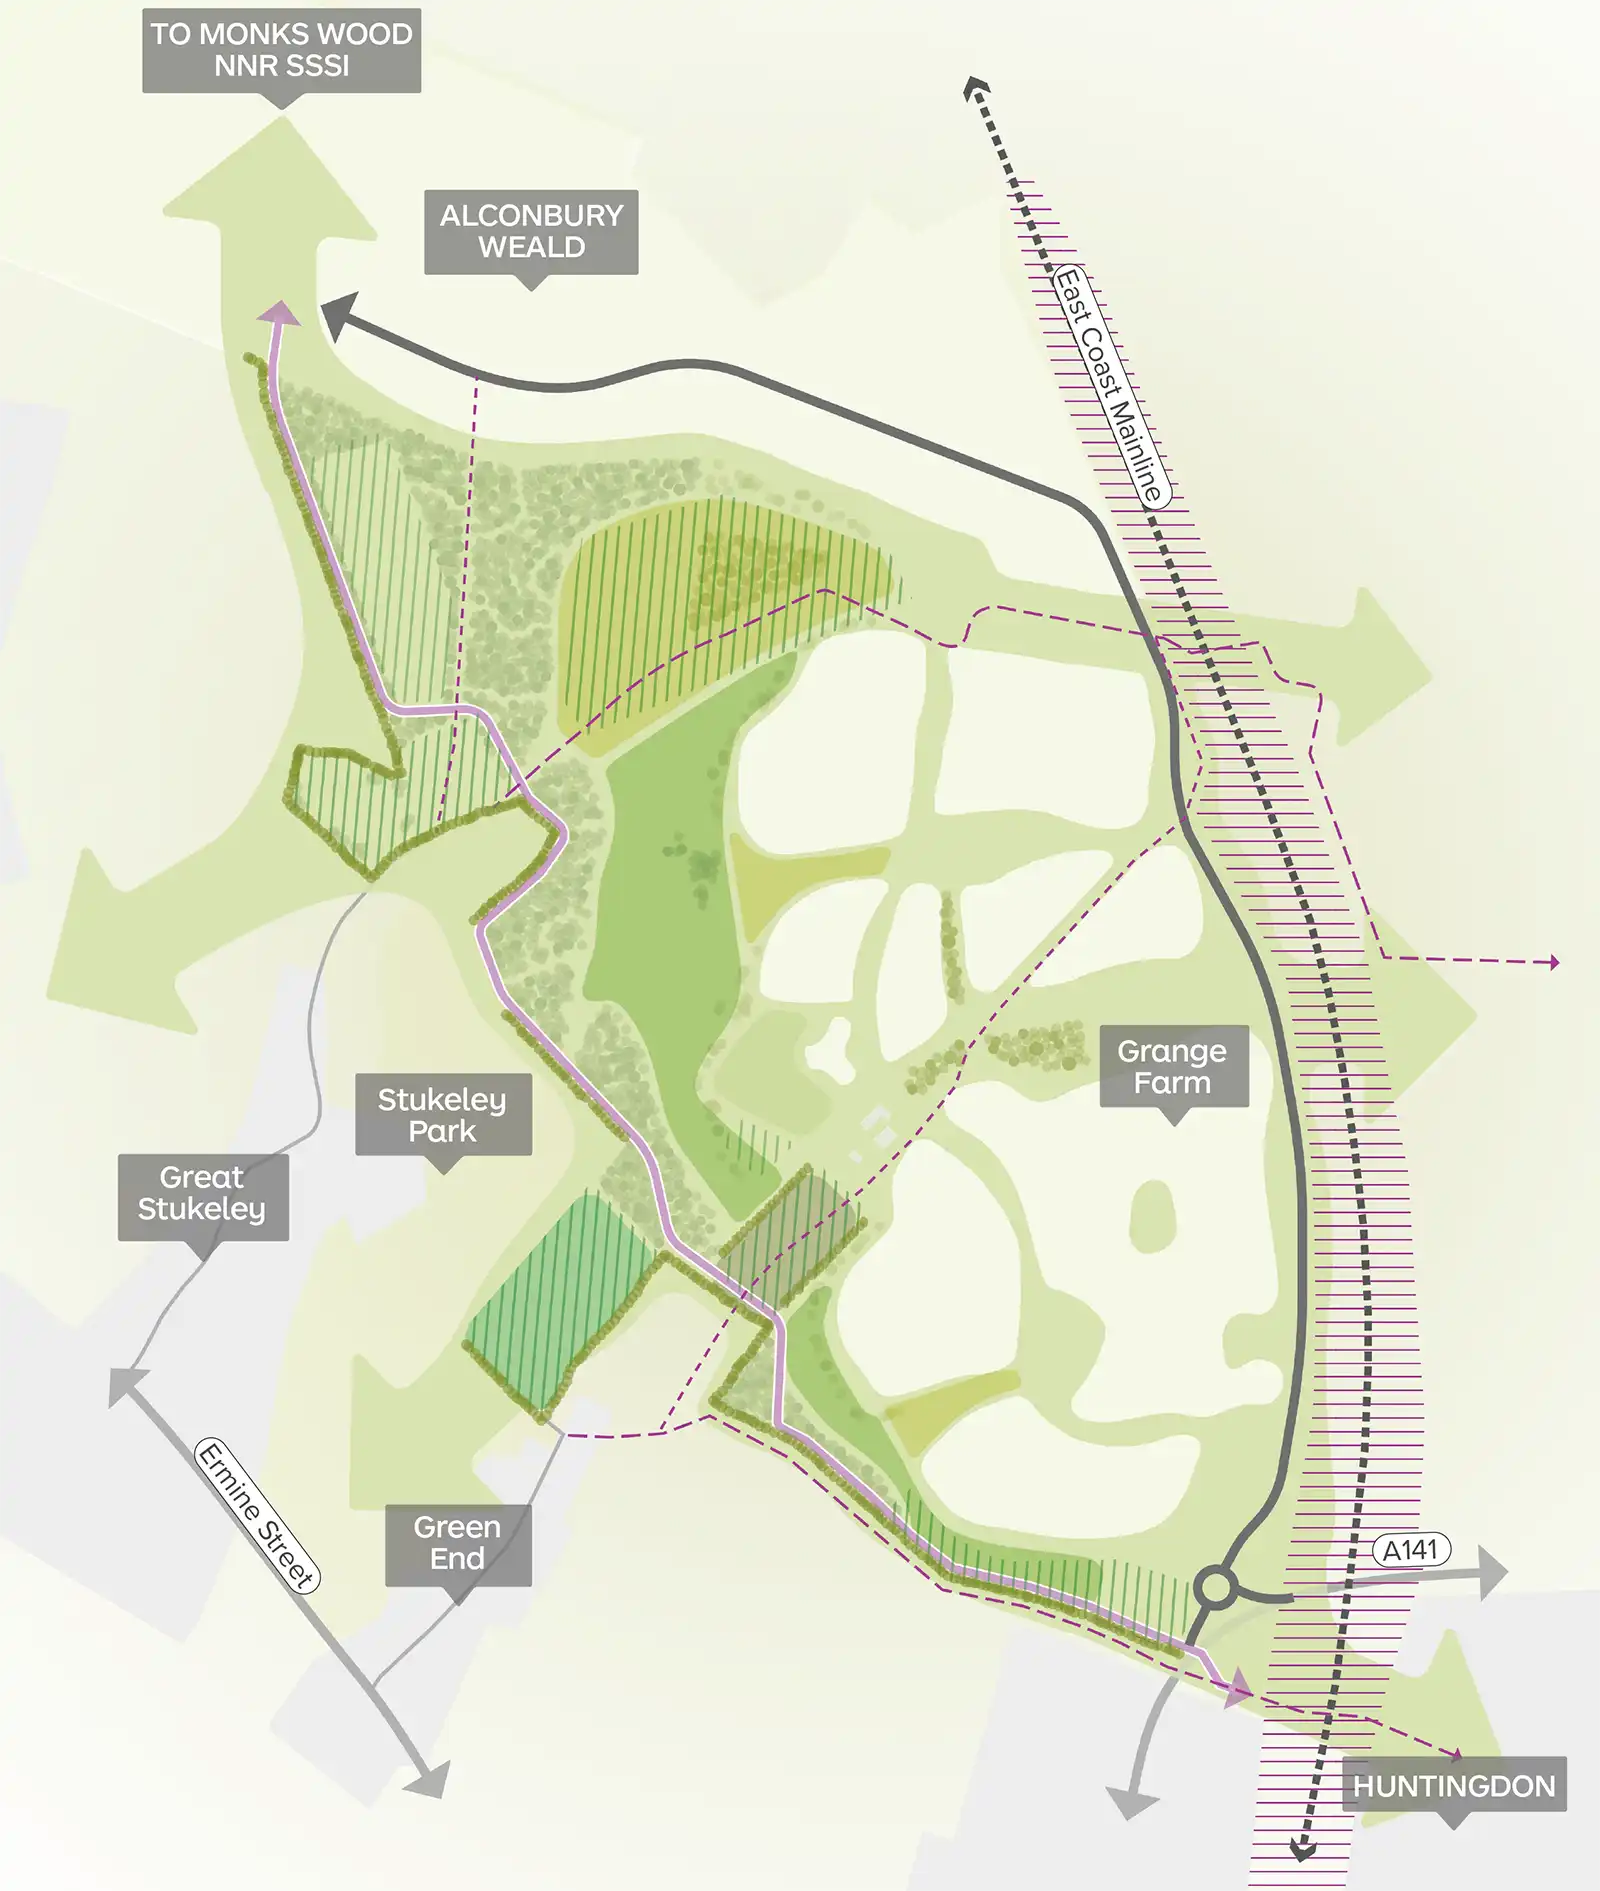 Map of Prestley Country Park showing grassland areas